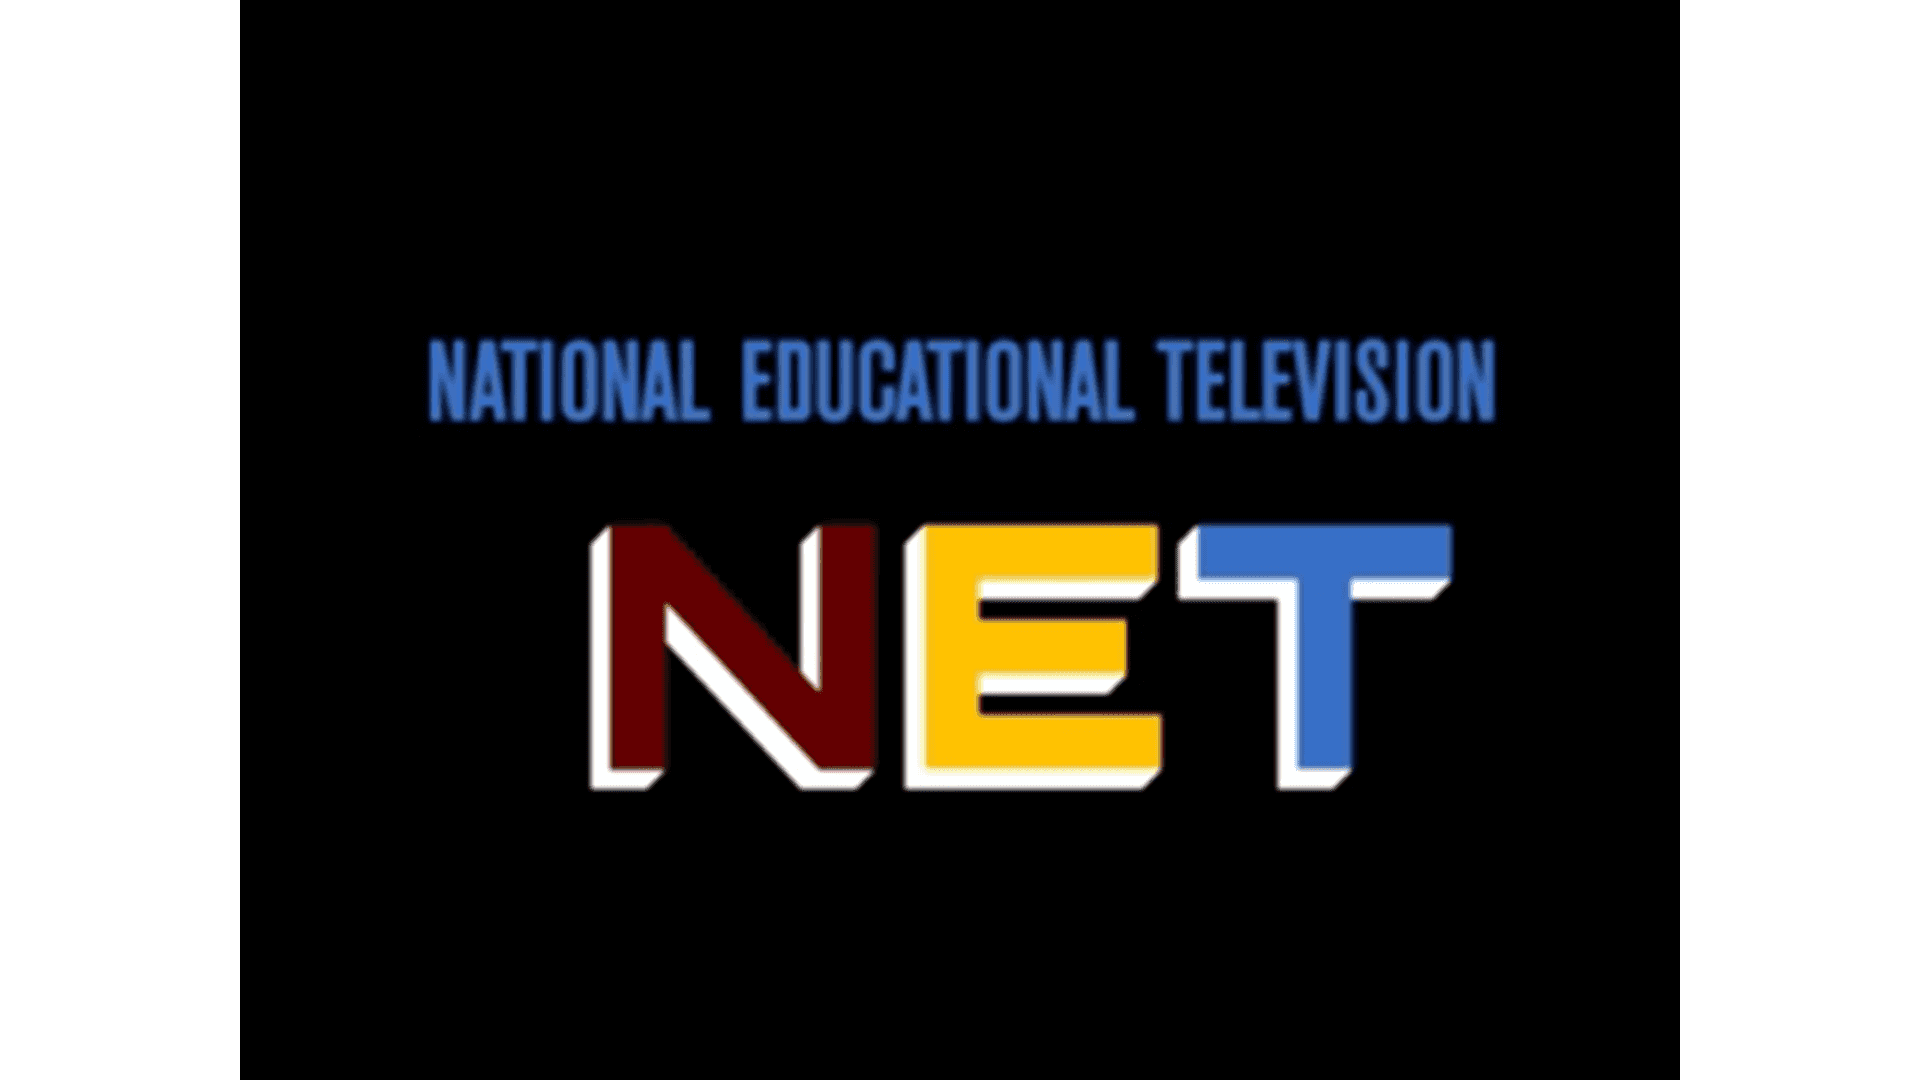 Tri-color logo for National Educational Television (NET)